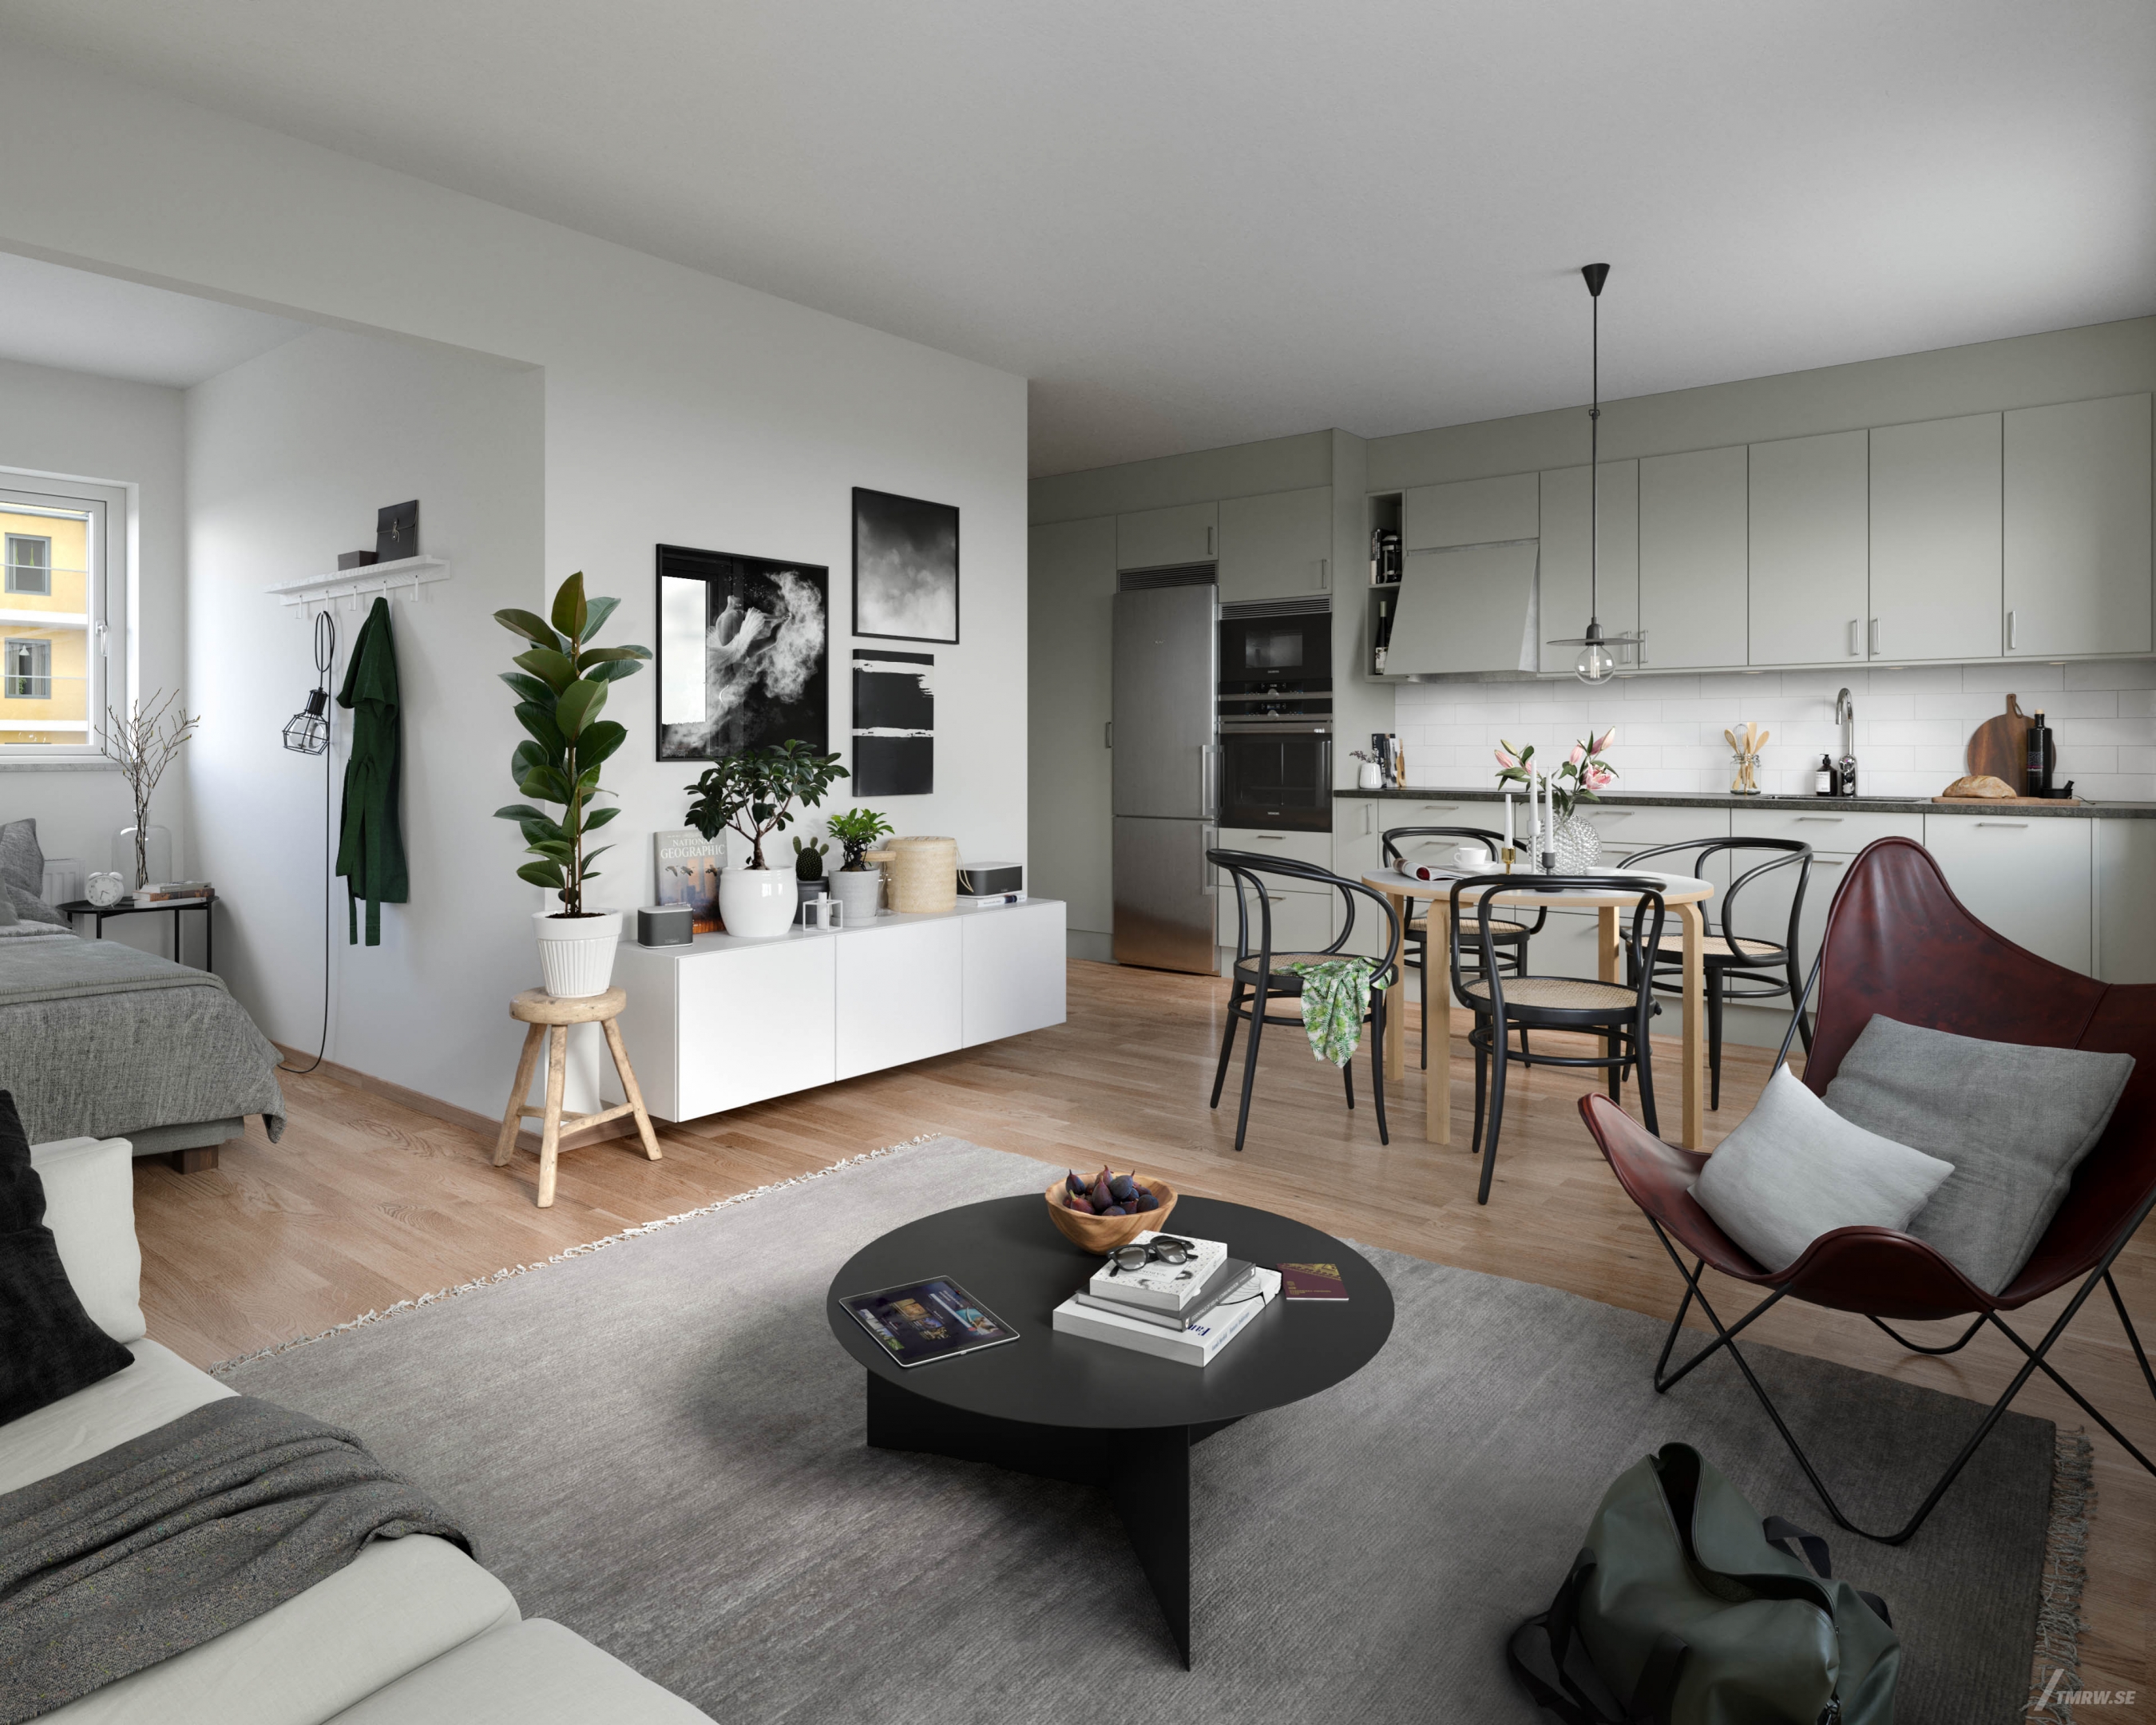 Architectural visualization of Tigeröga for Riksbyggen, interior of a one-room flat in daylight